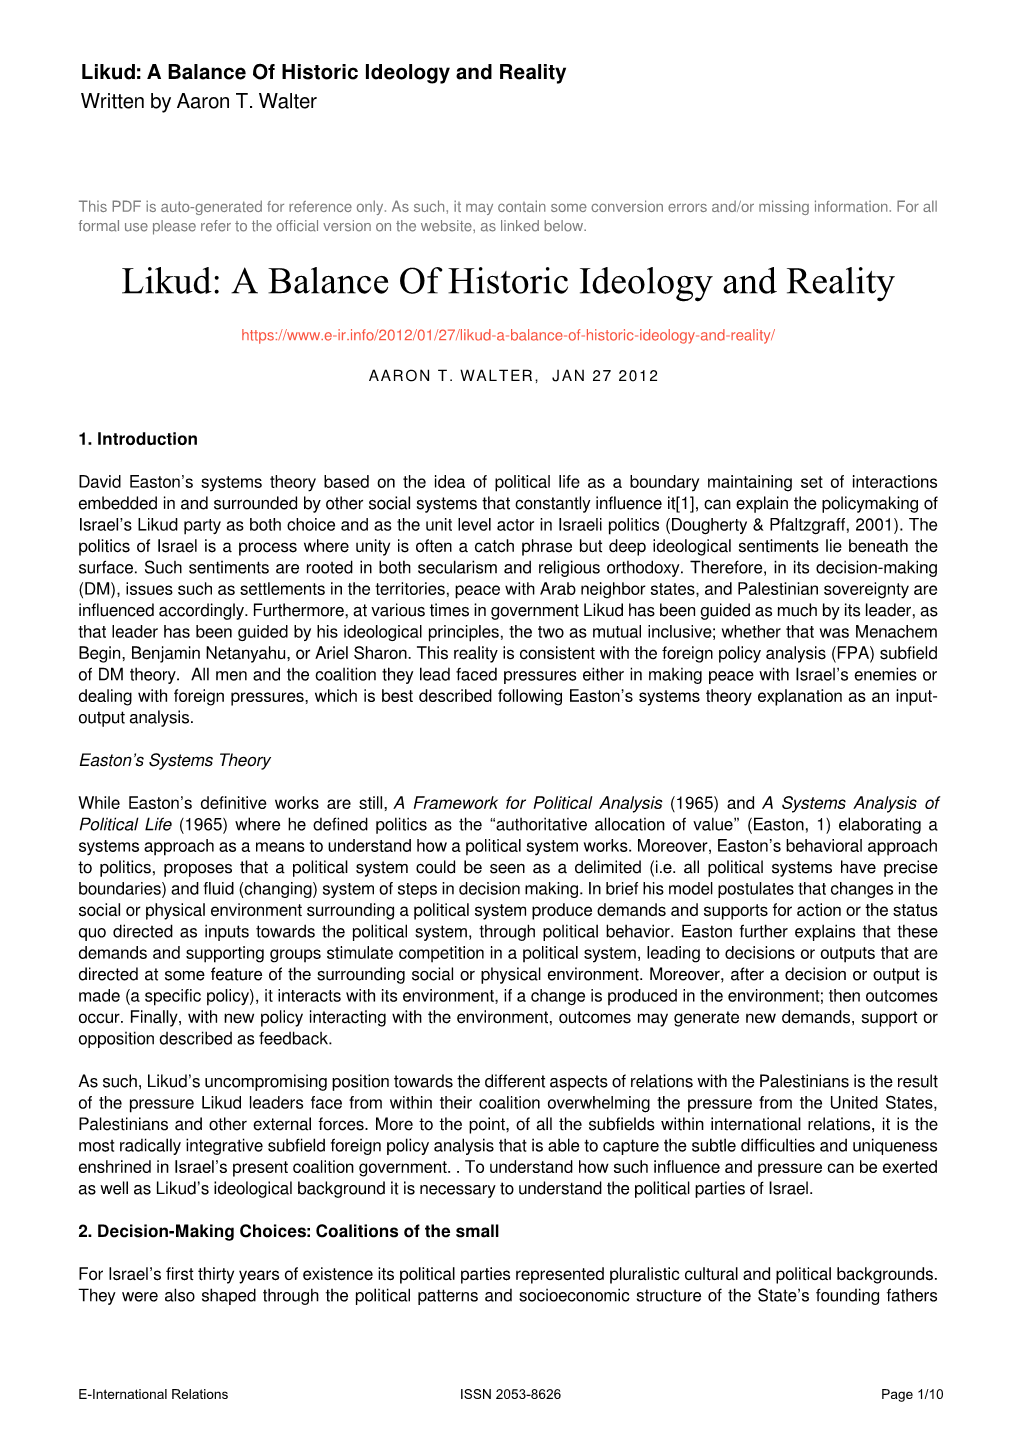 Likud: a Balance of Historic Ideology and Reality Written by Aaron T